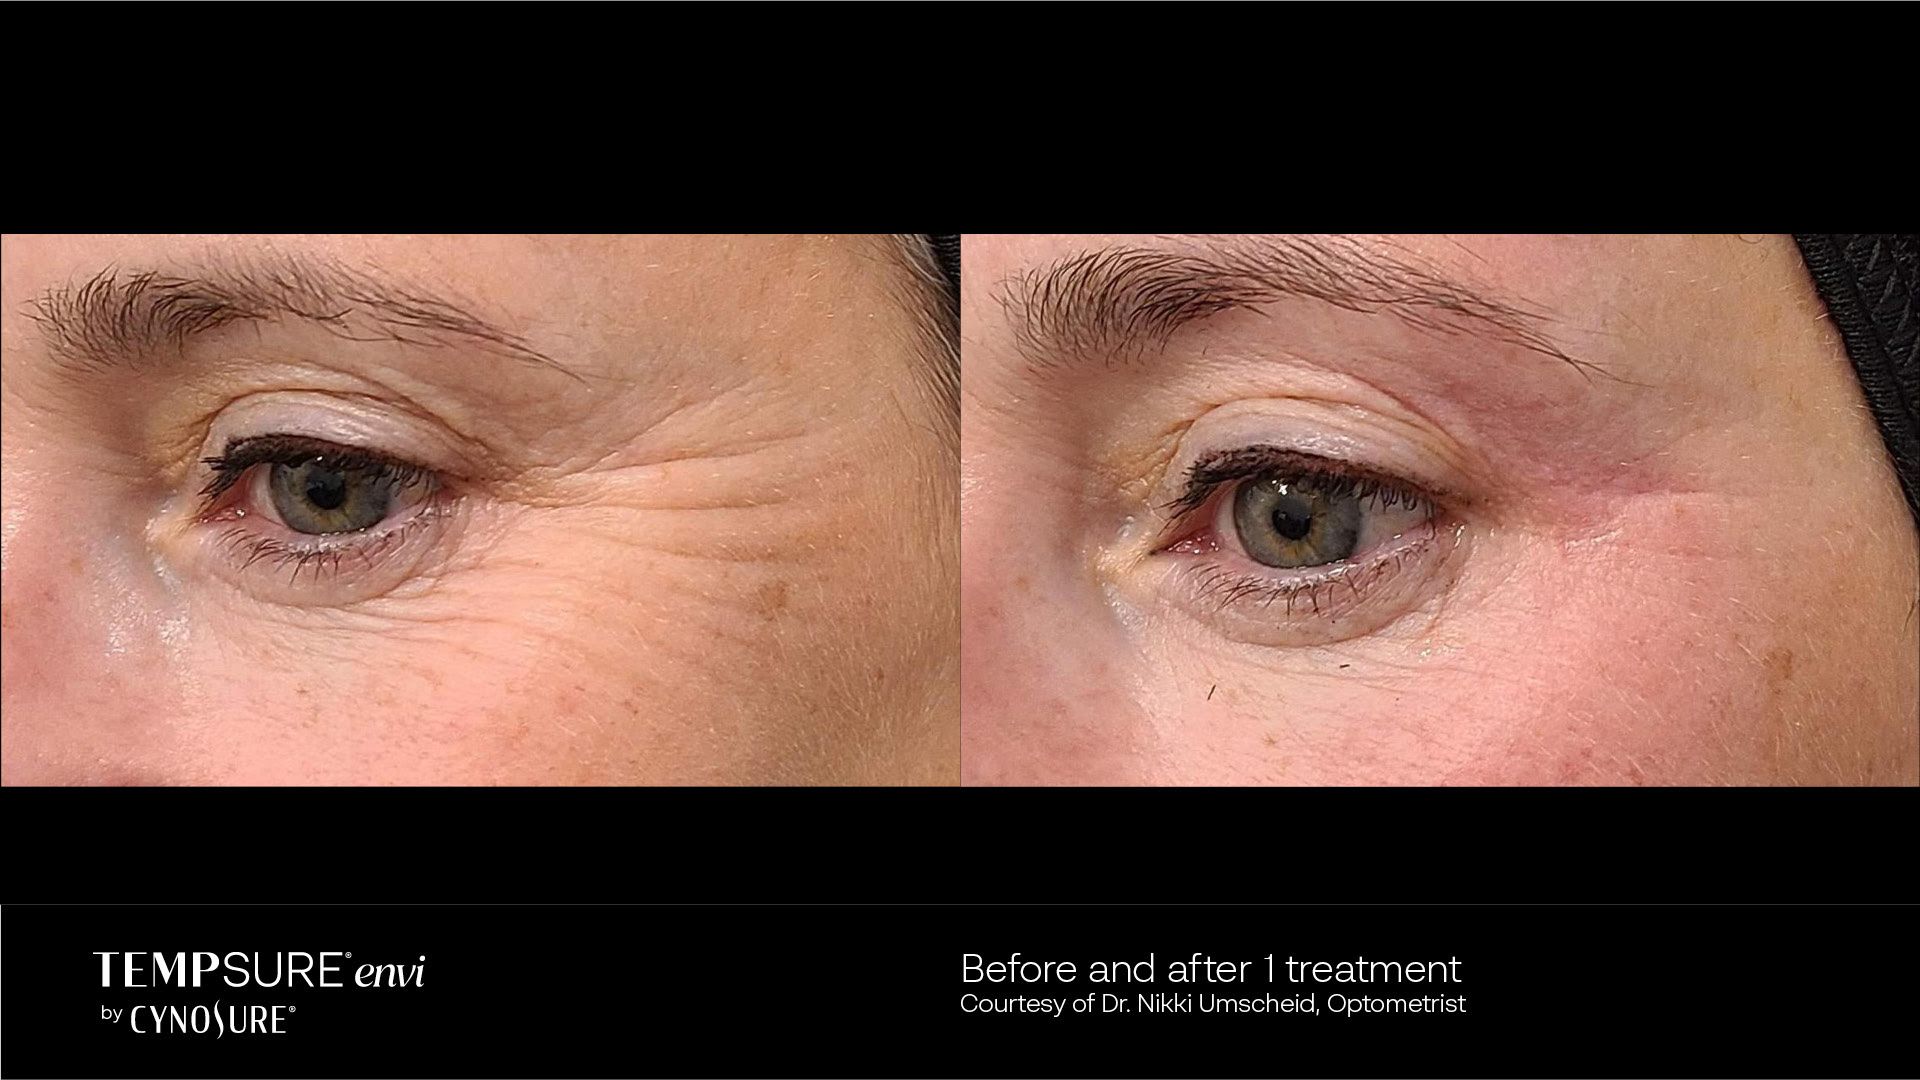 Befoer and after of Tempsure Envi eye treatment at Look! Optometry 